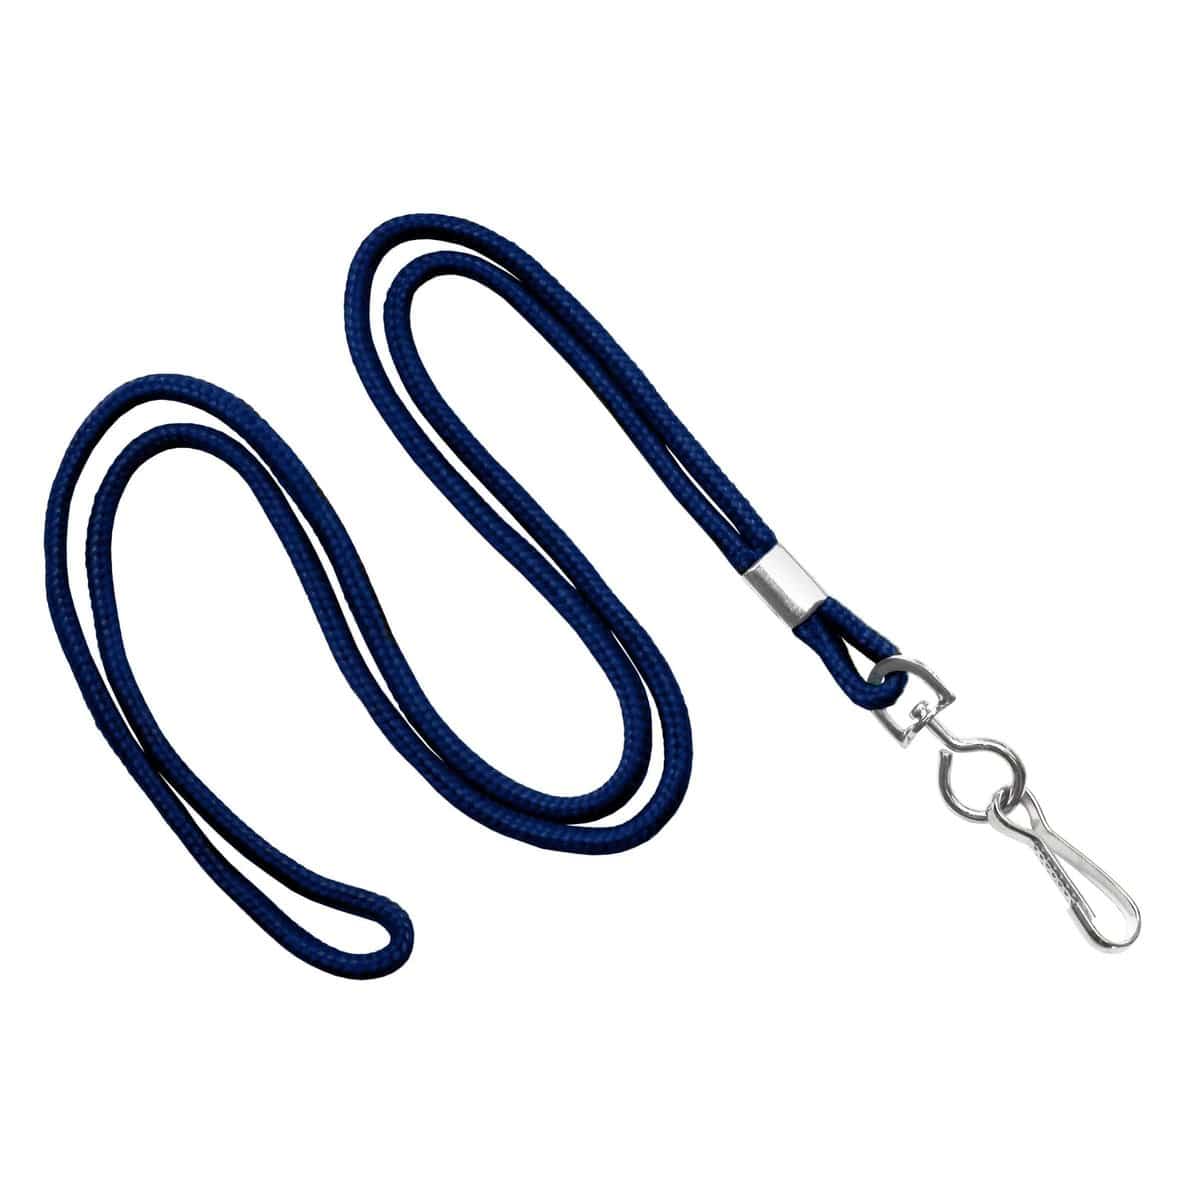 Royal Blue Round Non-Breakaway Lanyard with Swivel Hook by Specialsit ID, Sold Individually